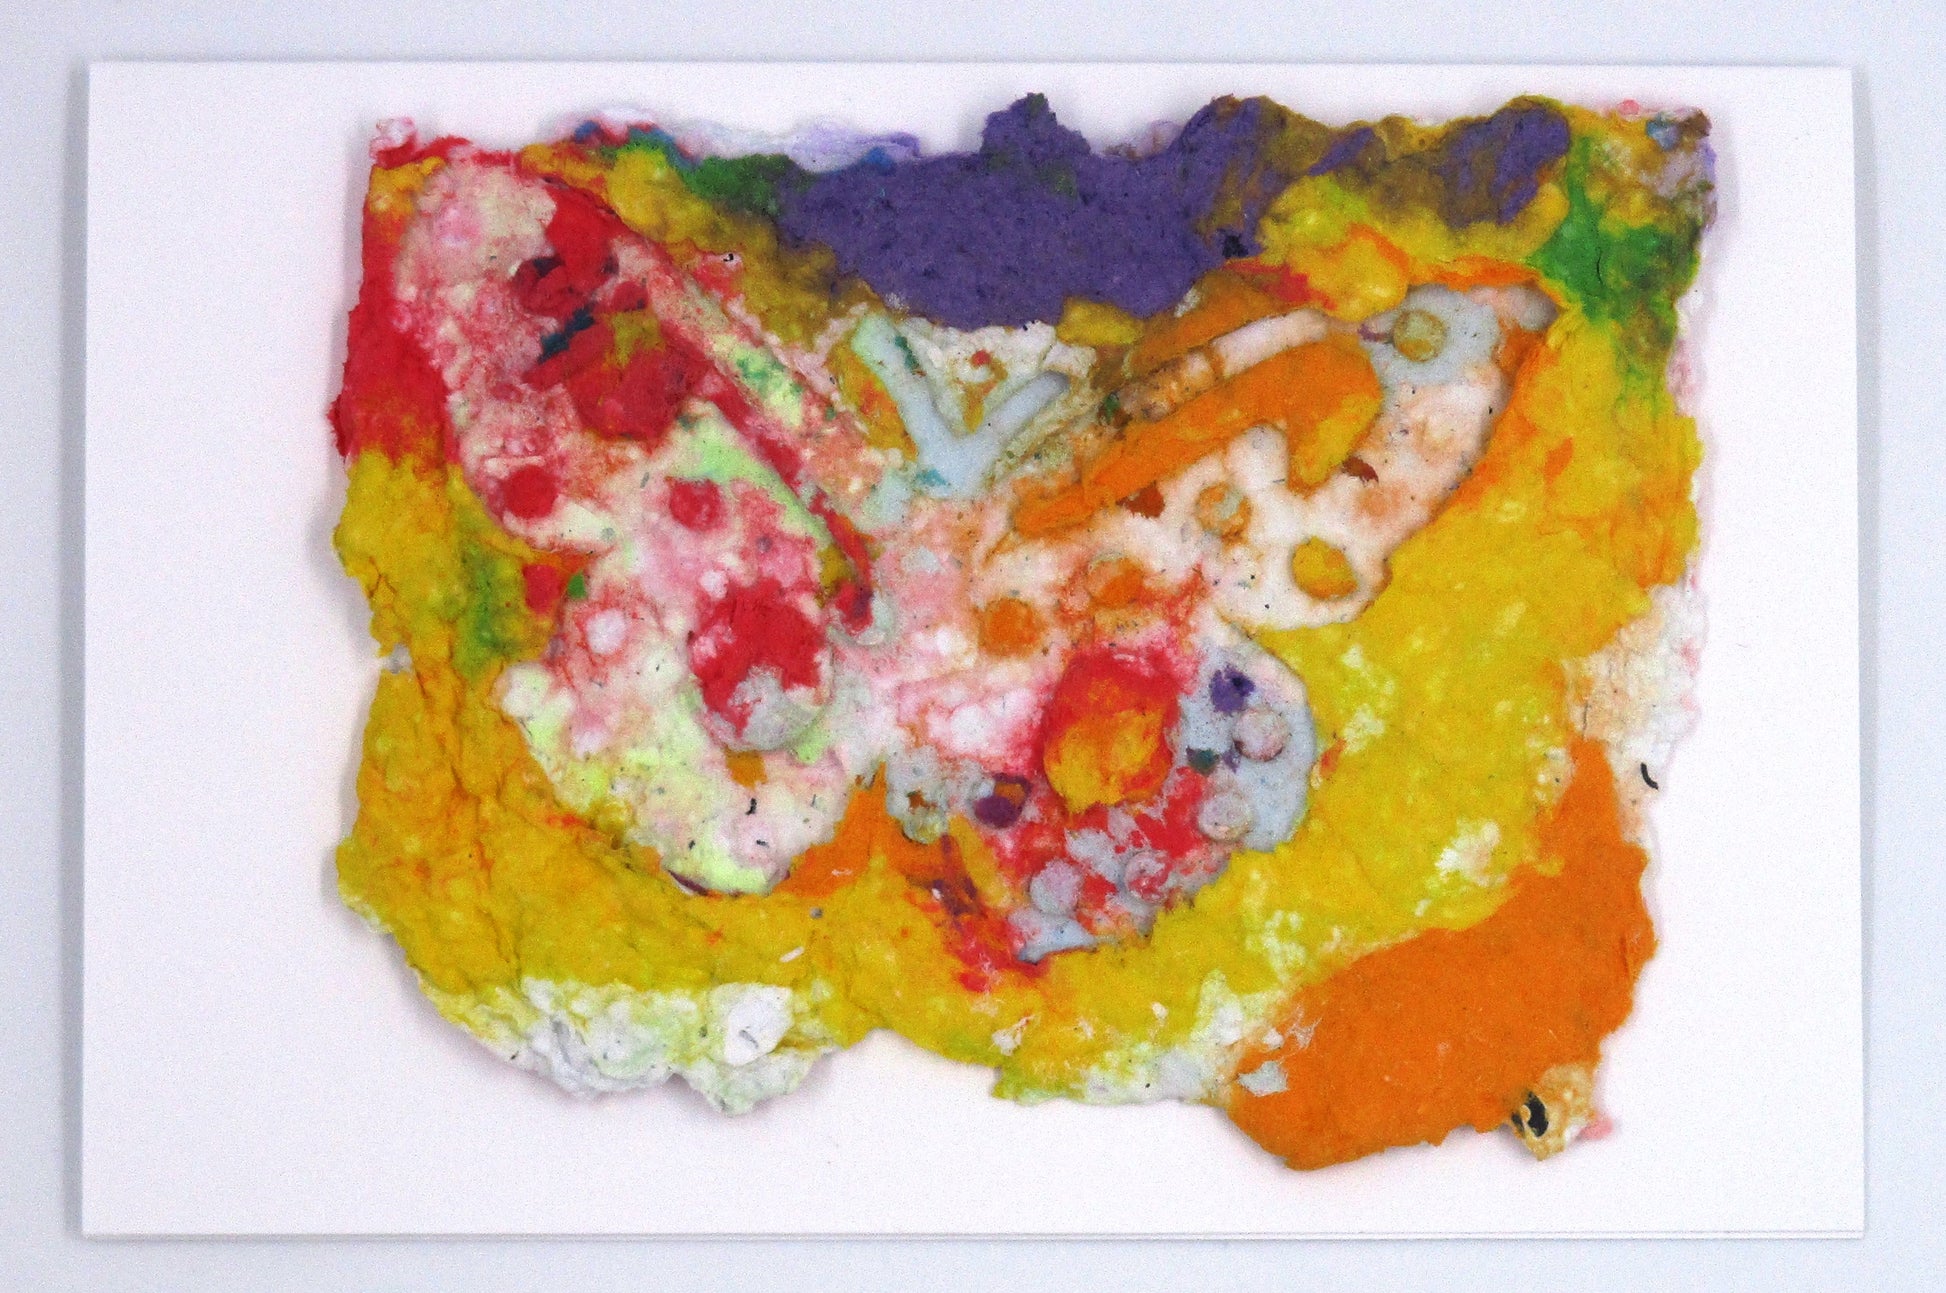 Handmade paper greeting card of purple, red, yellow and orange colors melted together in the background with a white butterfly over top